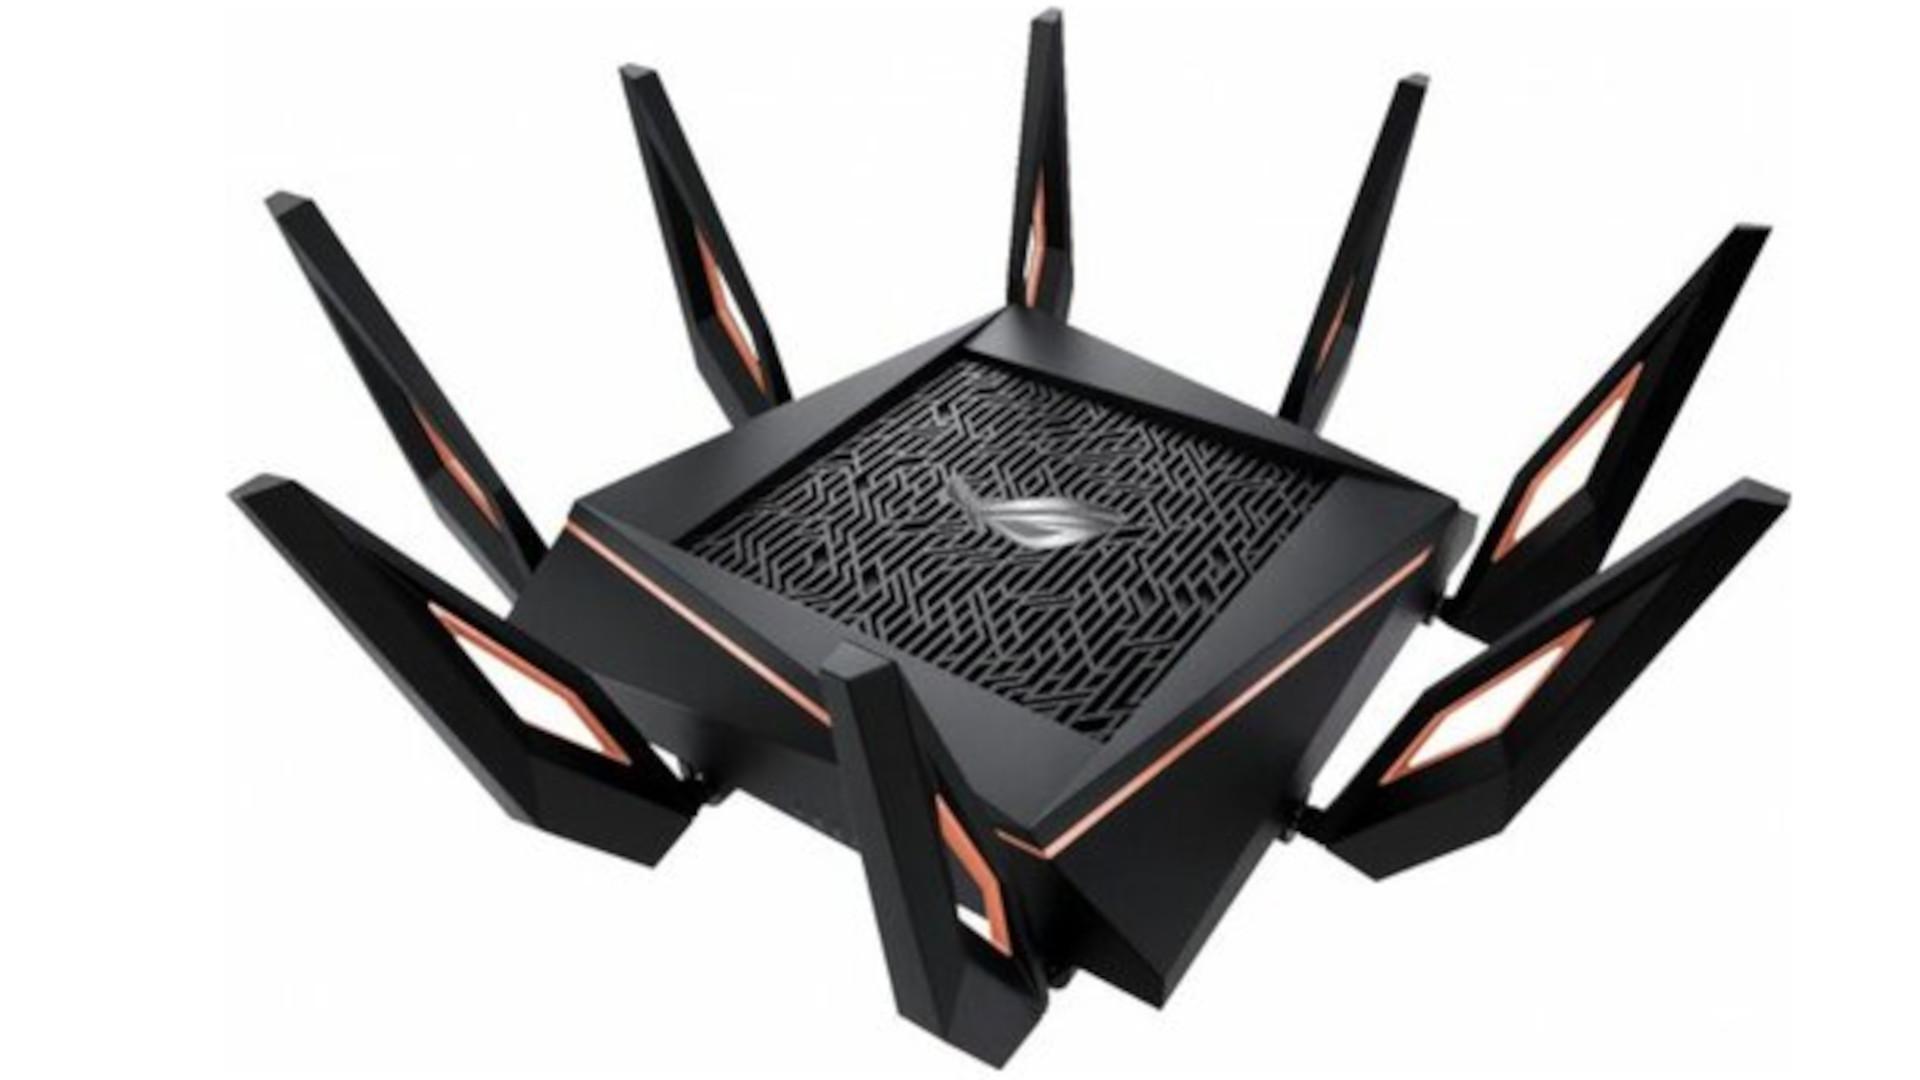 ASUS ROG Rapture GT AX11000 PRO Router 2